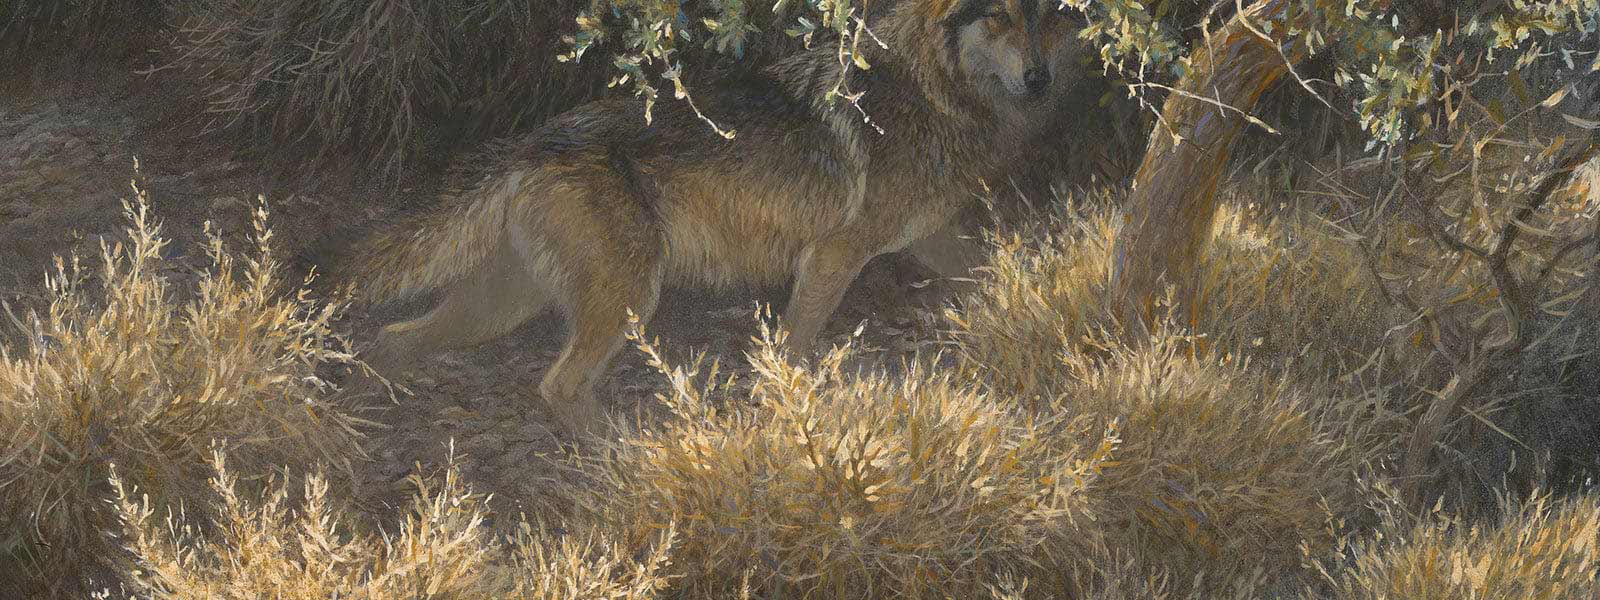 Painting of a wolf among tall brown grass and tree branches